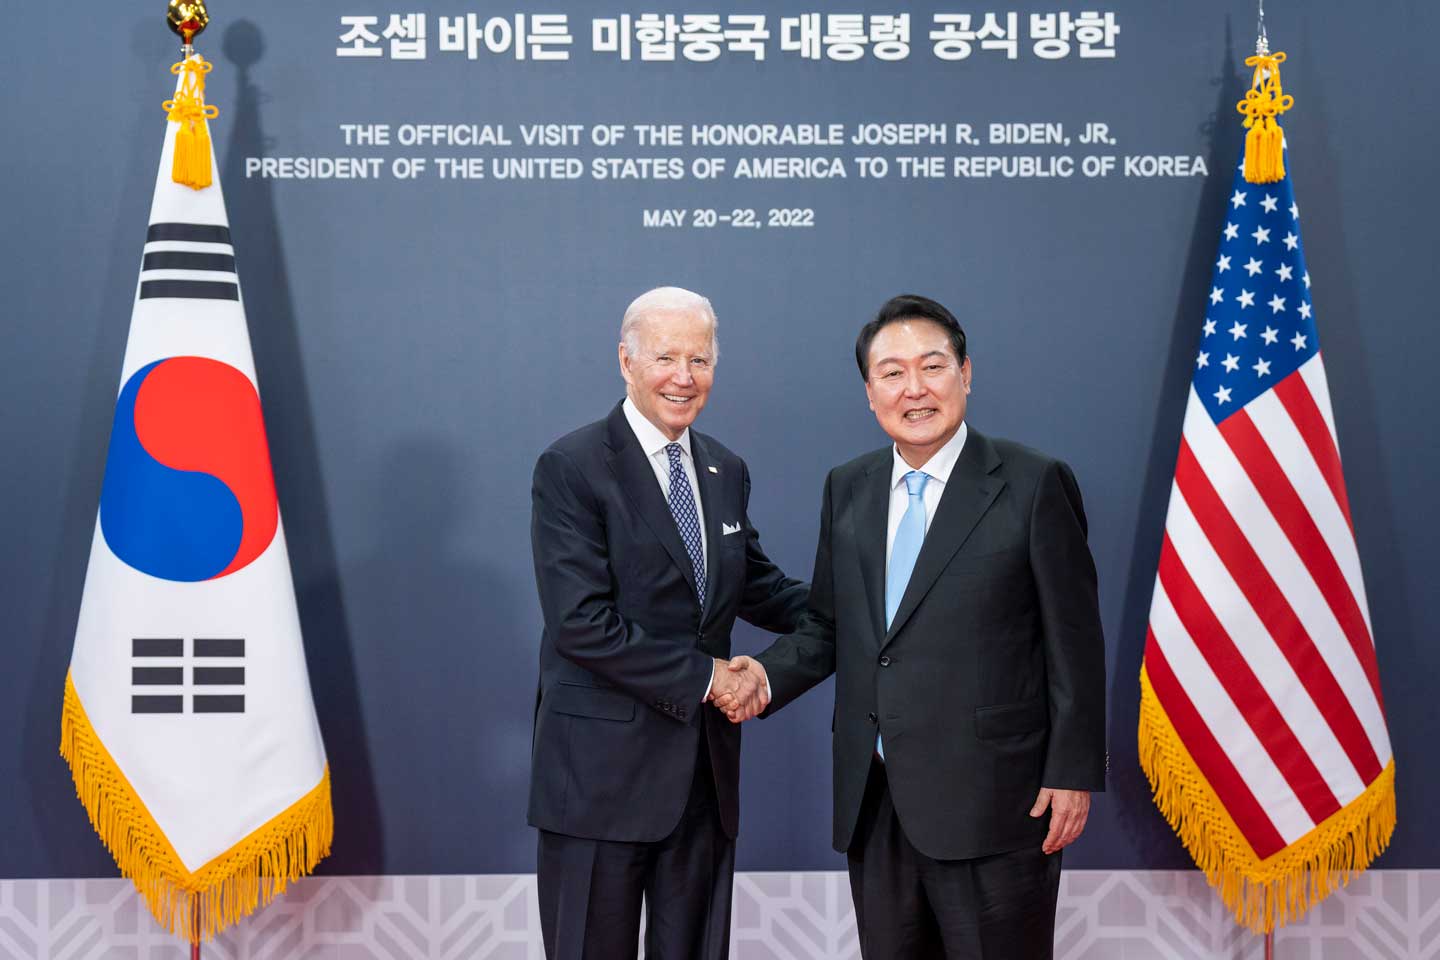 President Biden meeting with President of South Korea Yoon at the Presidential Office in Yongsan